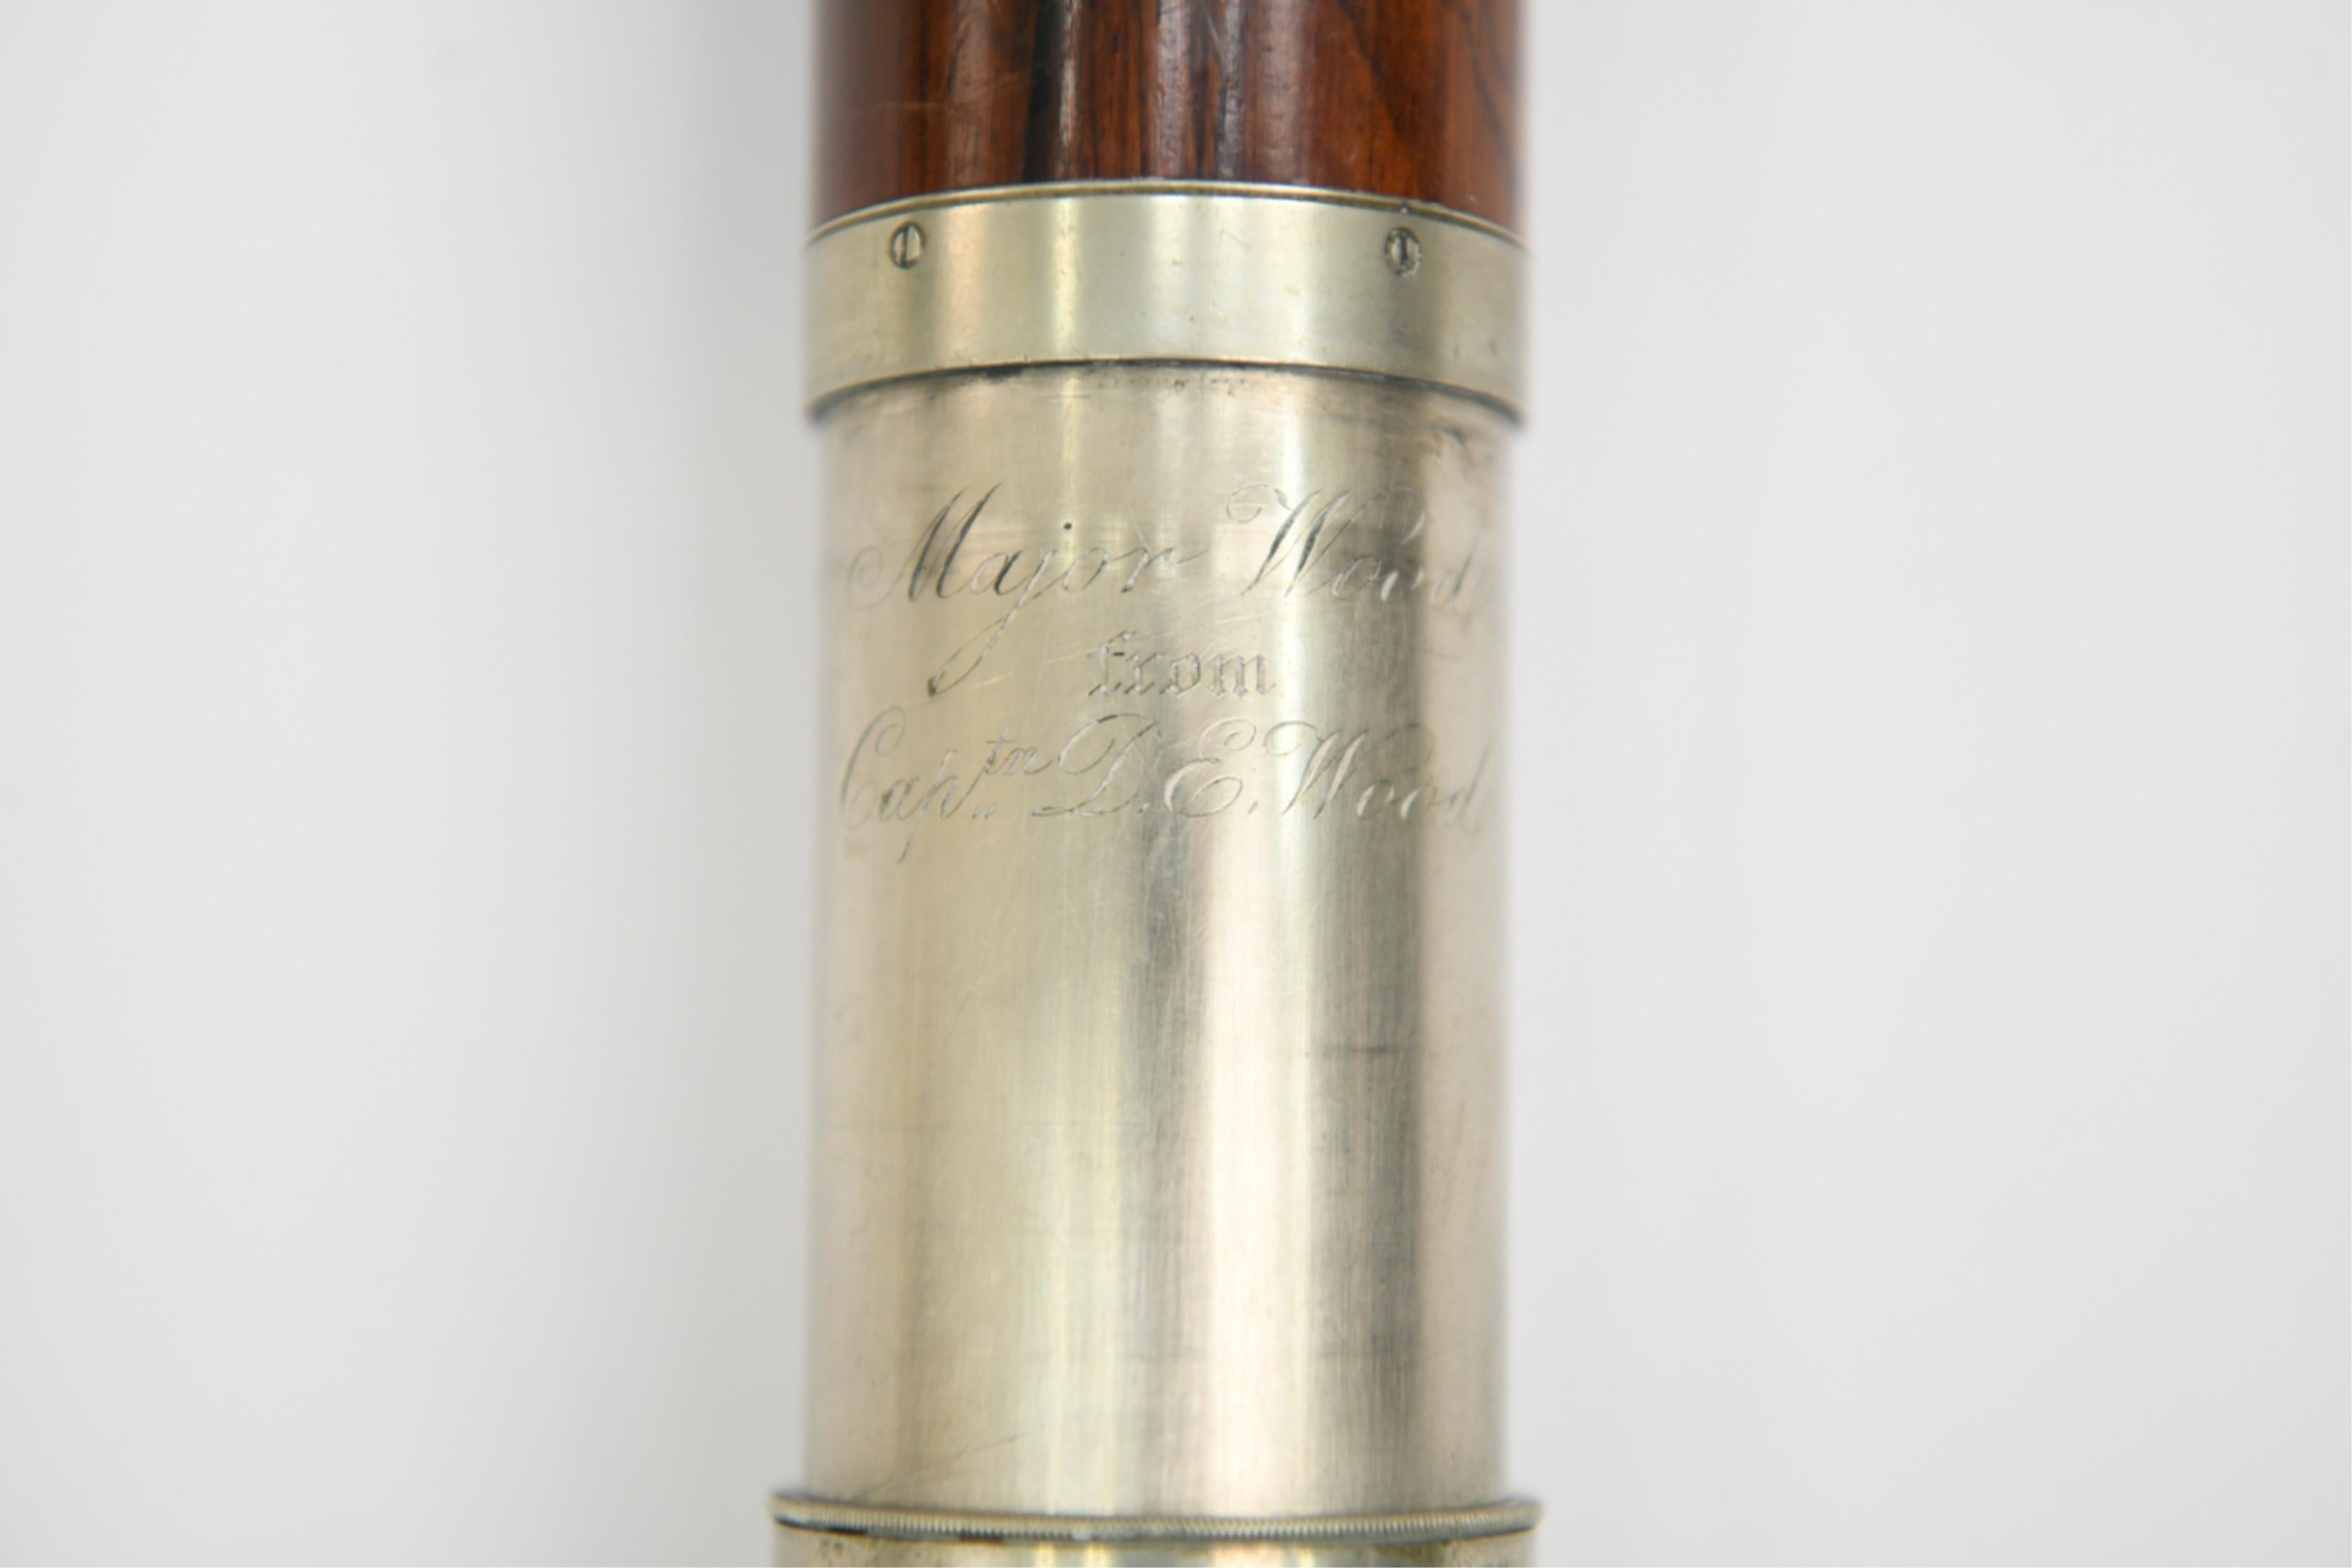 British D.E. Wood Inscribed Nautical Telescope & Compass with Rosewood Barrel, c. 1860s